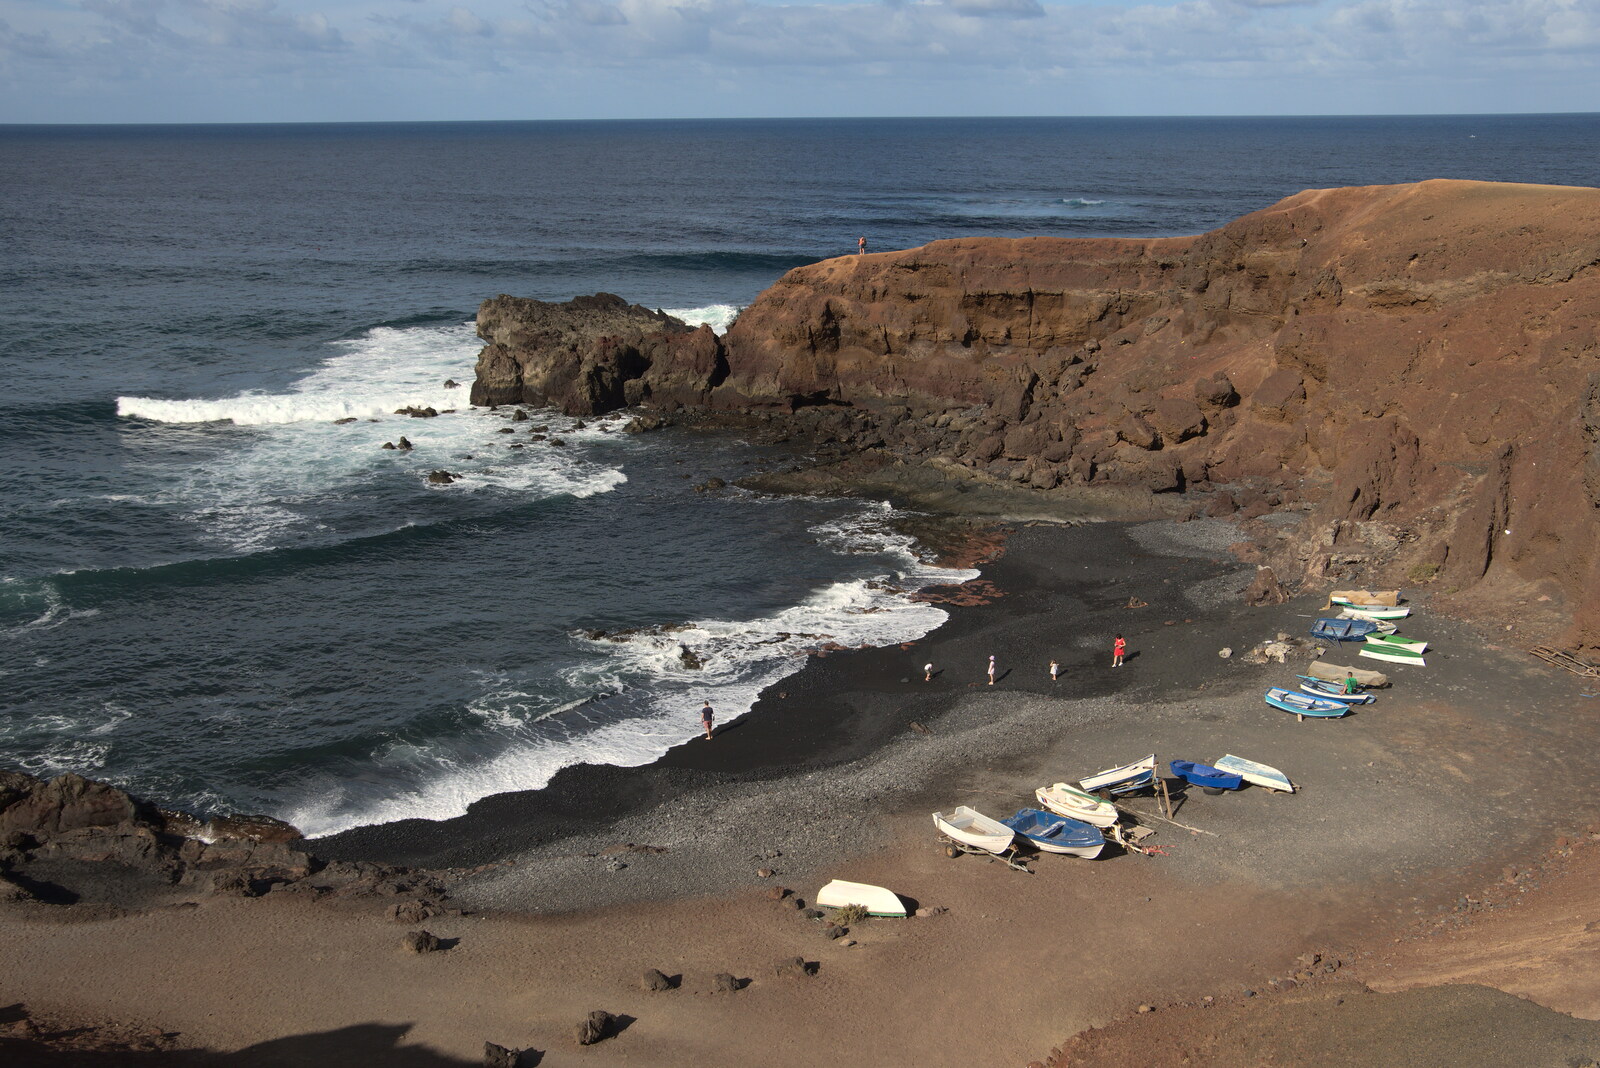 A volcanic bay with a bunch of boats from The Volcanoes of Lanzarote, Canary Islands, Spain - 27th October 2021